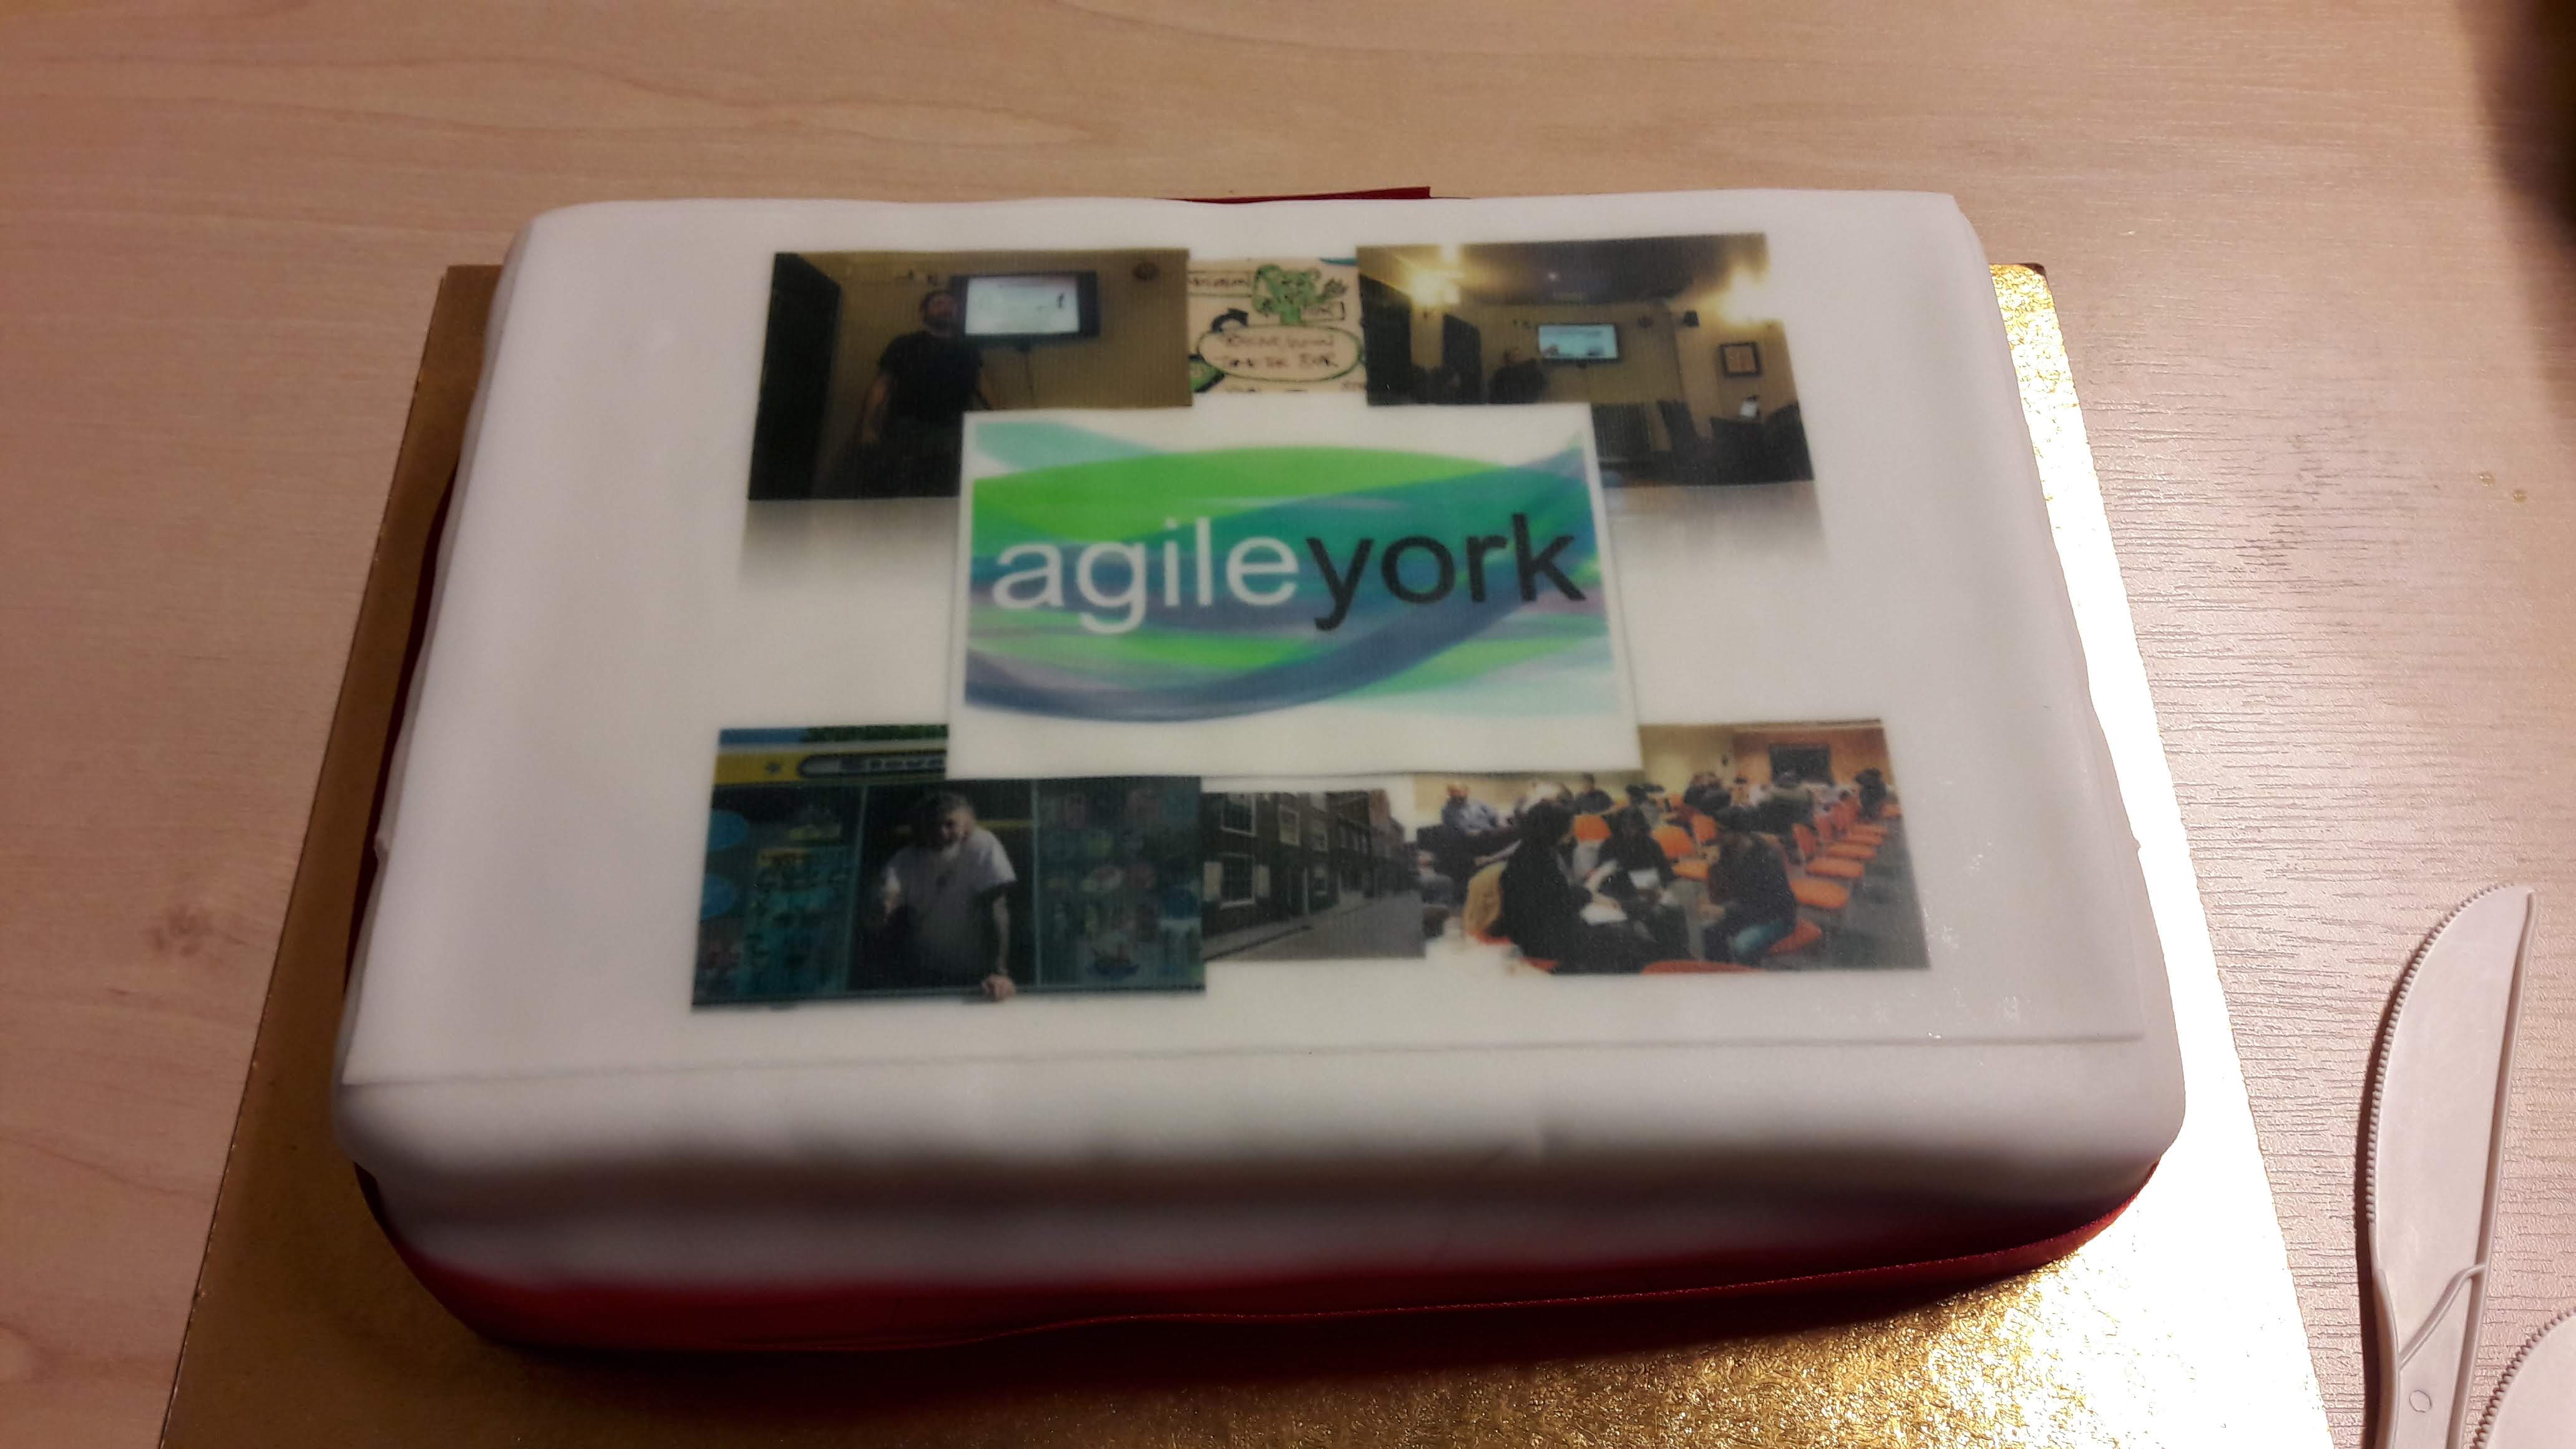 Agile York is 1 year old!